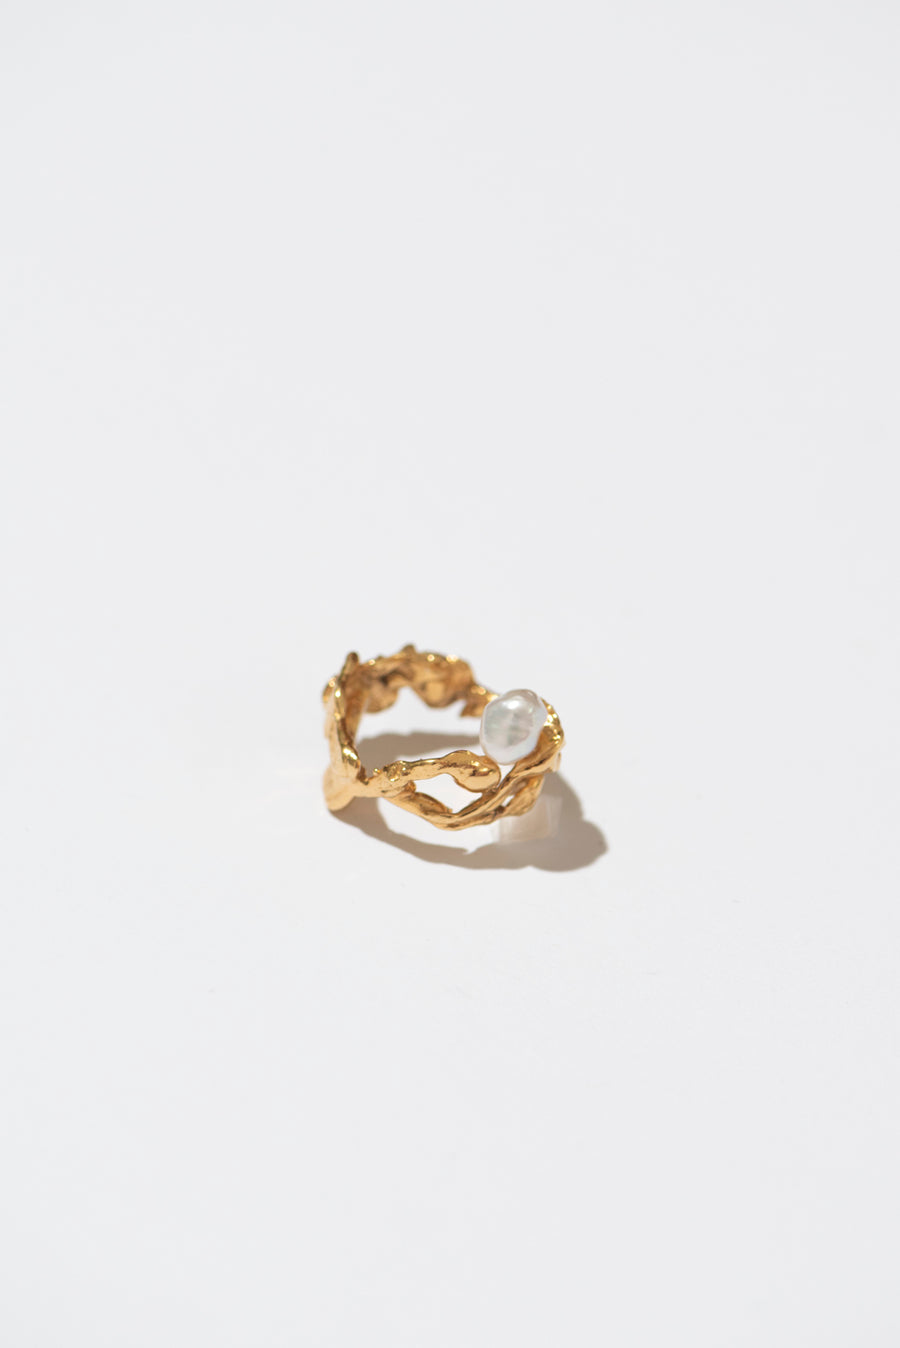 The NEW Statement Pearl Ring - Small